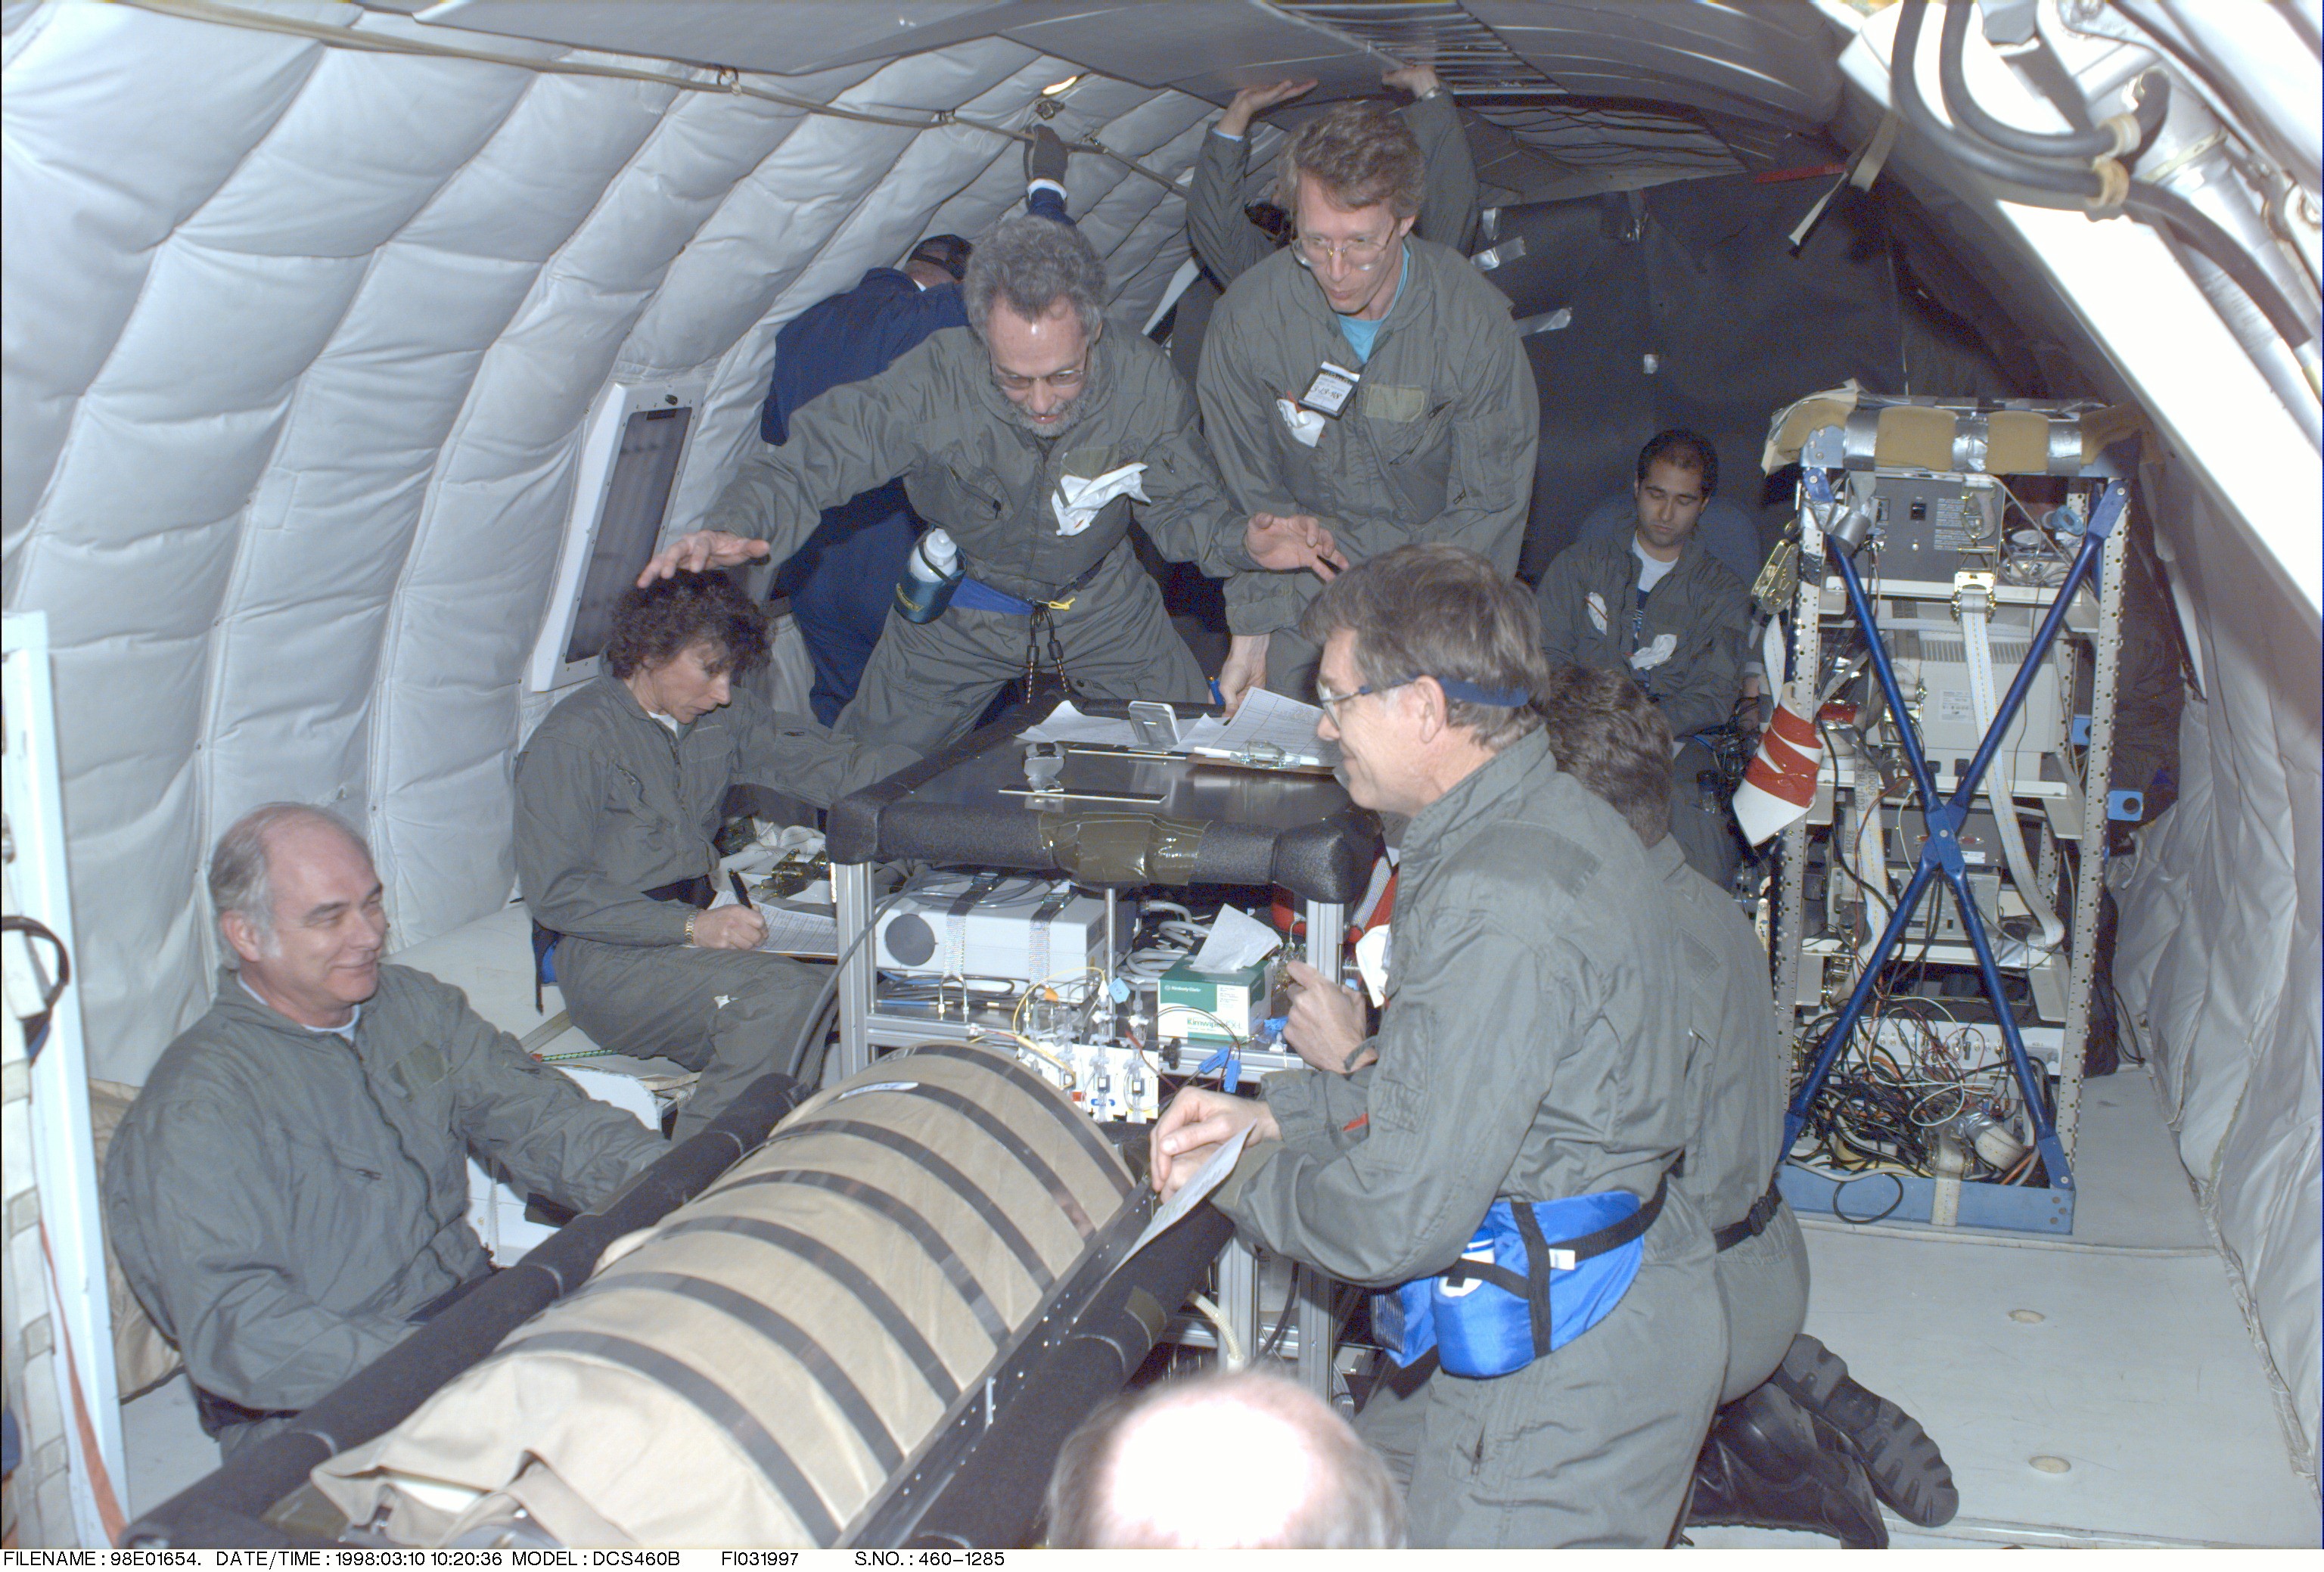 Fluorescent microsphere technology allowed this research team to study blood flow under weightless conditions aboard a NASA aircraft. 